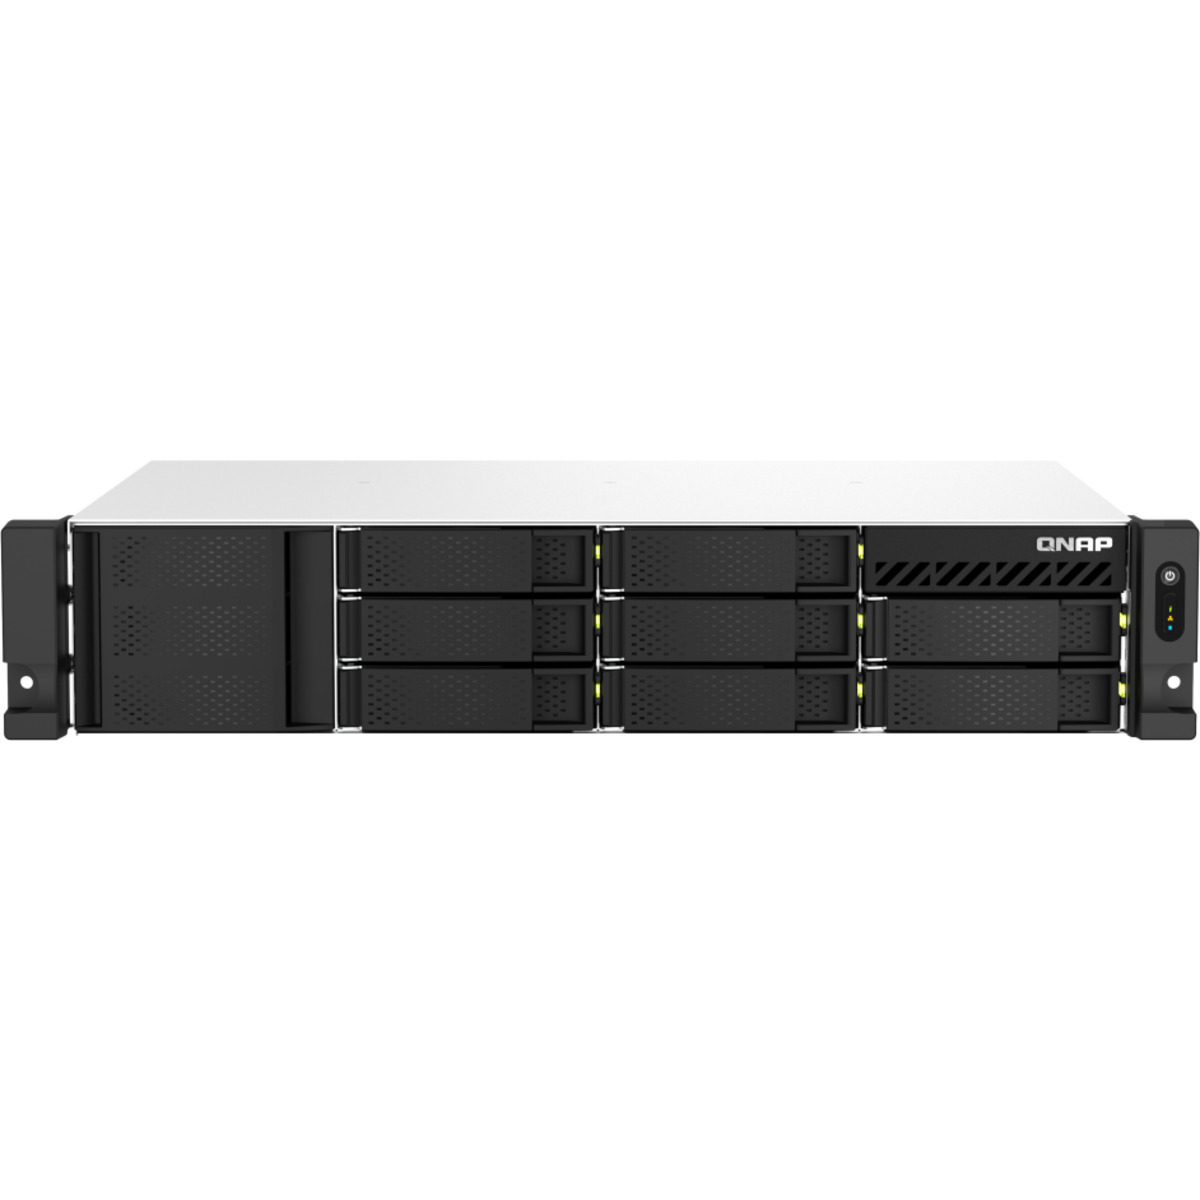 QNAP TS-873AeU-RP 24tb 8-Bay RackMount Multimedia / Power User / Business NAS - Network Attached Storage Device 4x6tb Seagate EXOS 7E10 ST6000NM019B 3.5 7200rpm SATA 6Gb/s HDD ENTERPRISE Class Drives Installed - Burn-In Tested - FREE RAM UPGRADE TS-873AeU-RP